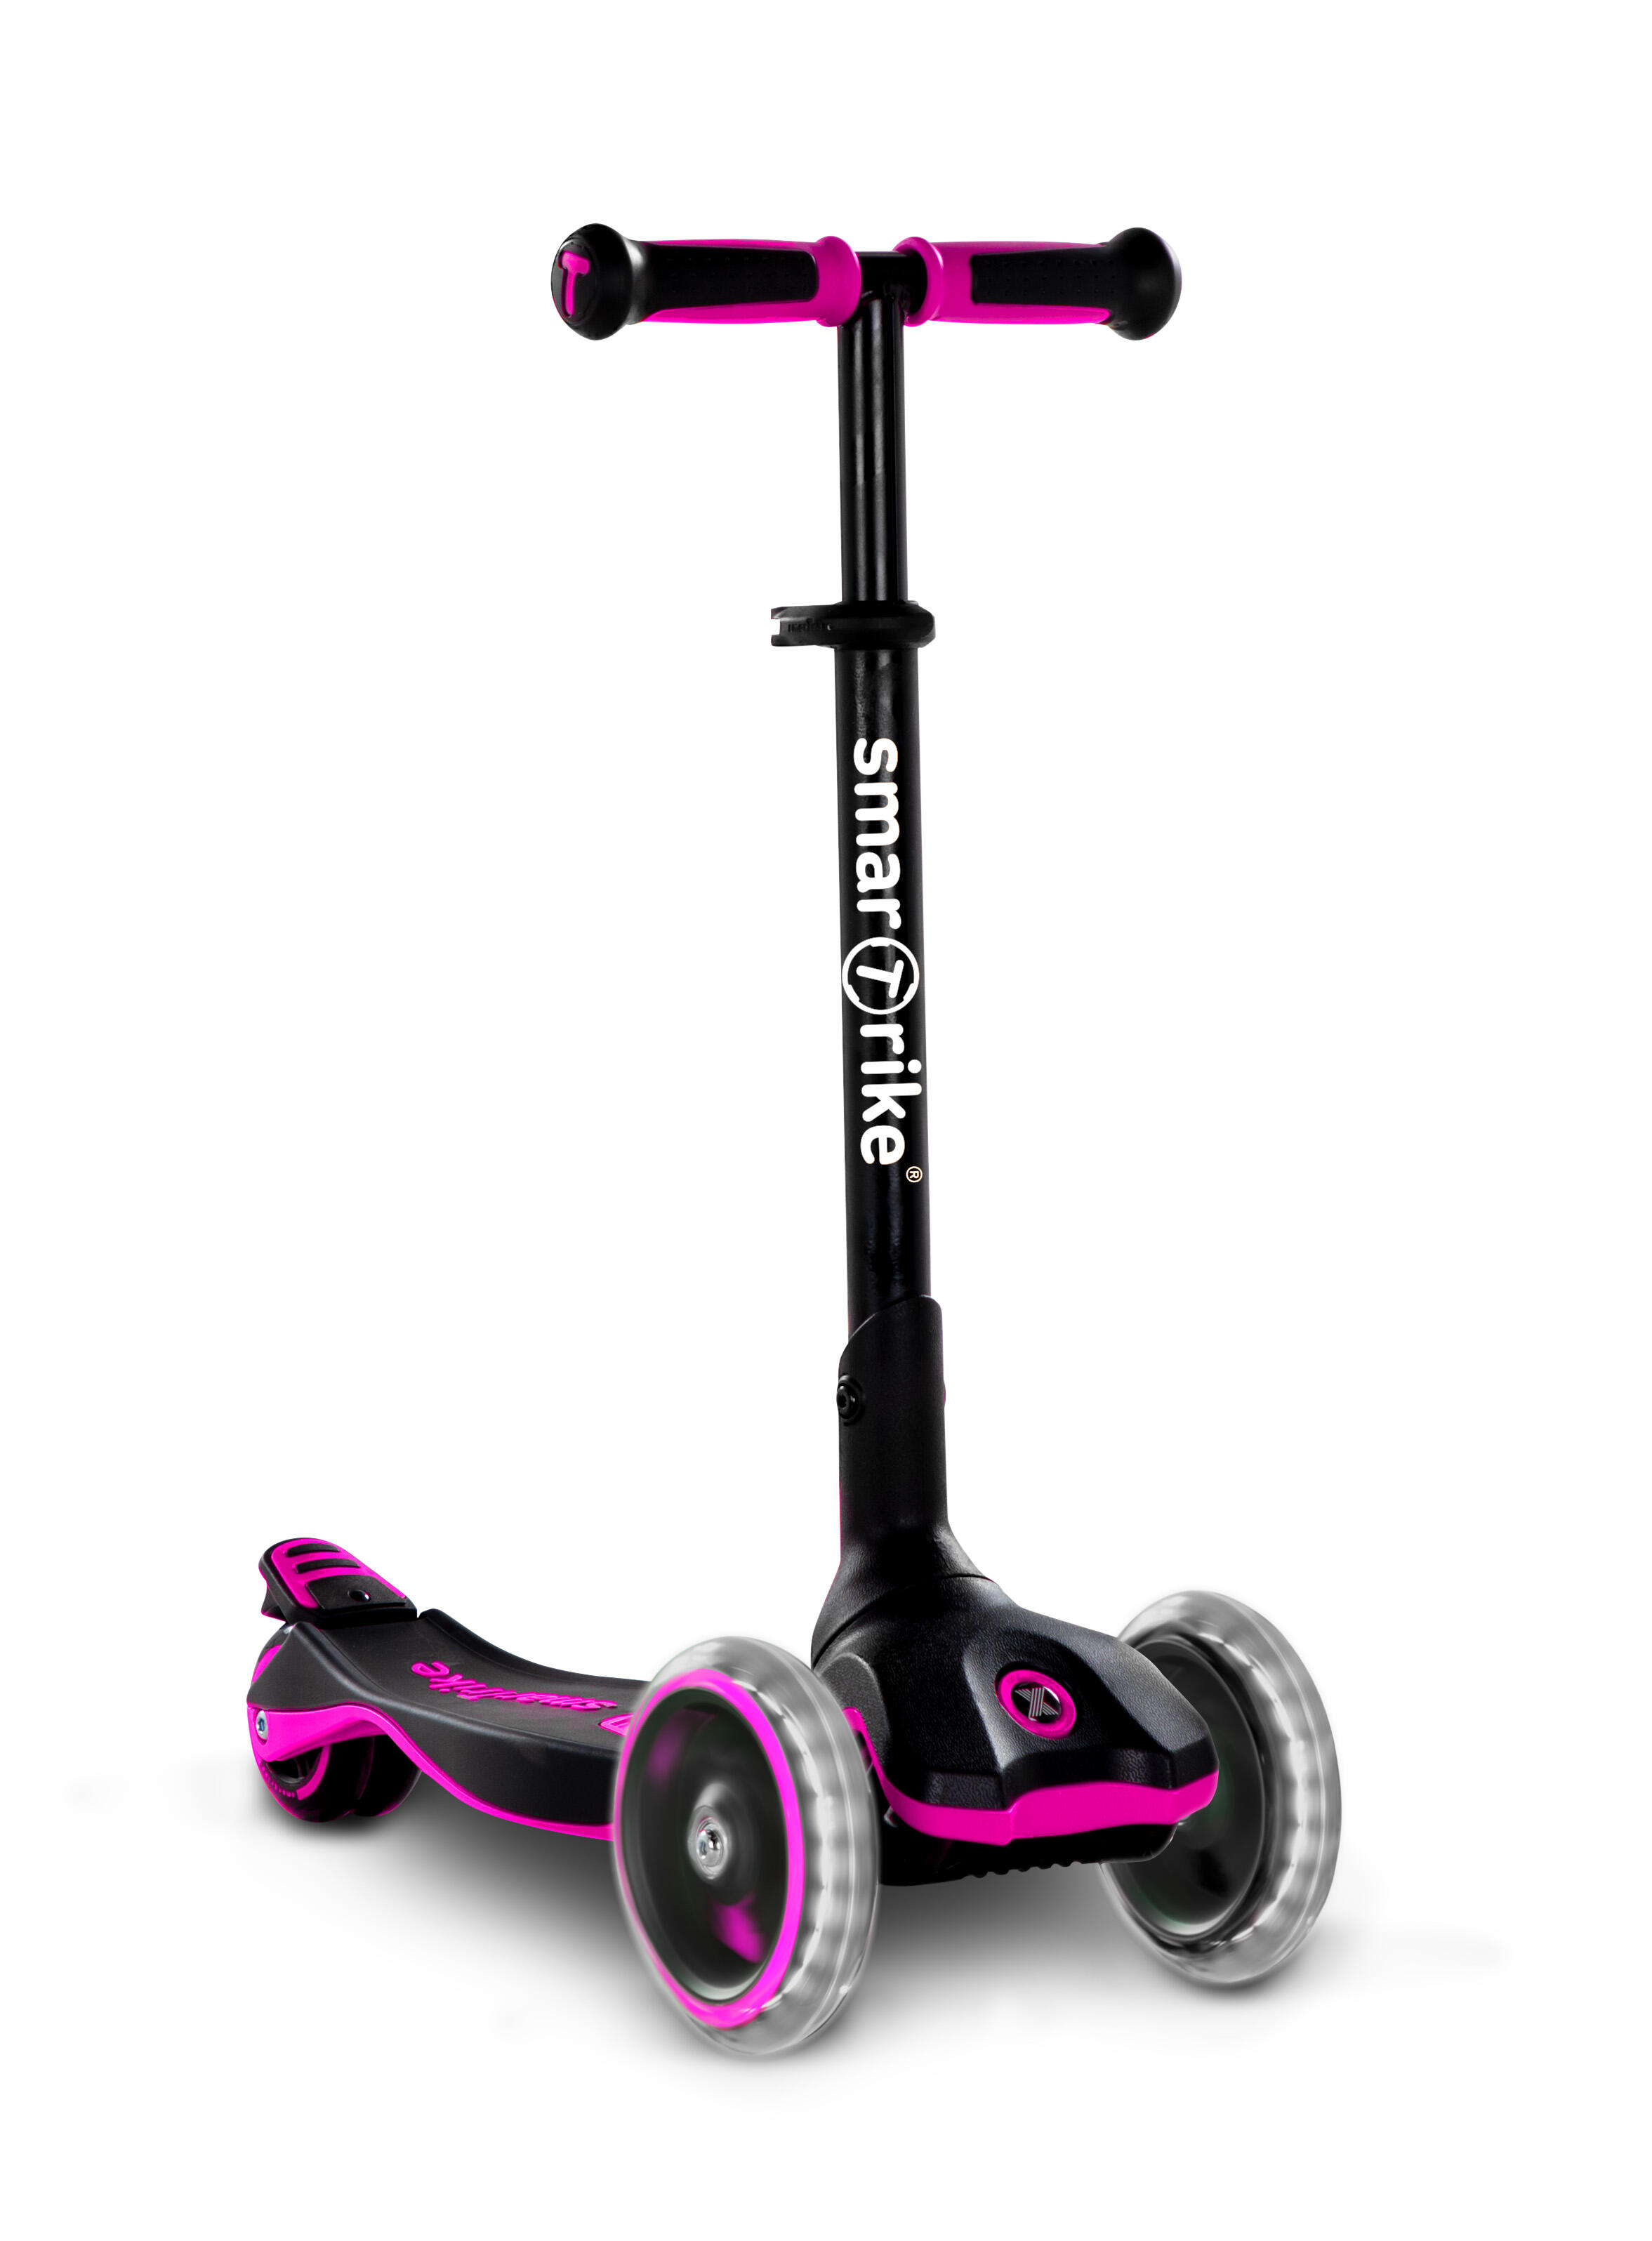 Xtend Scooter - Pink 1/7